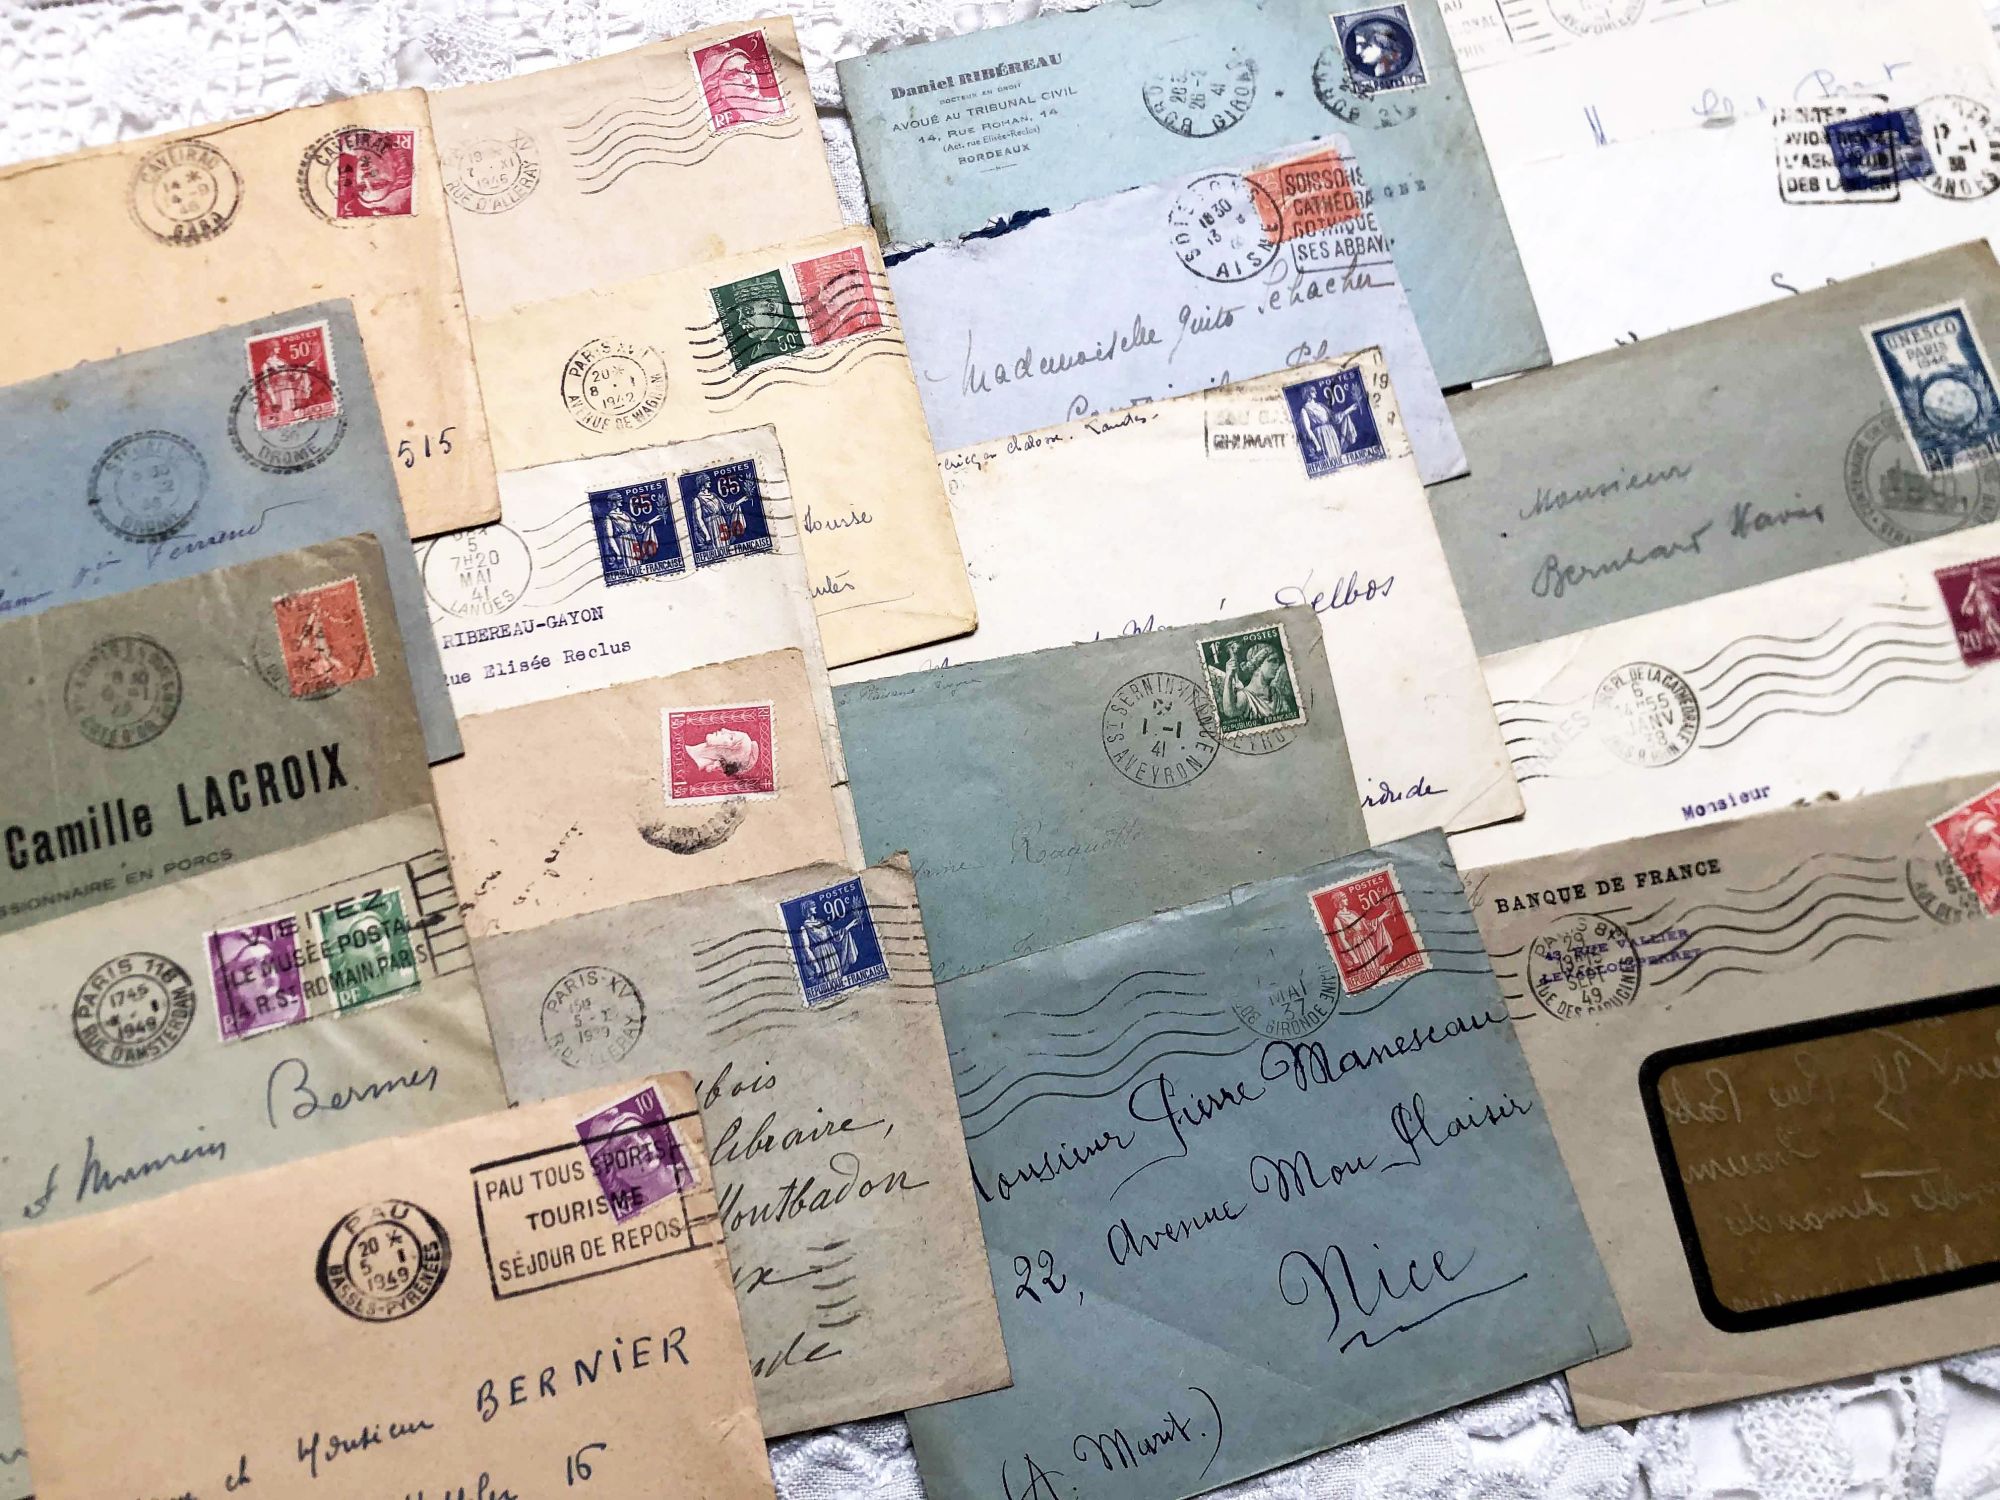 20 French envelopes from 1930s and 1940s of different colors and sizes - Without letters inside